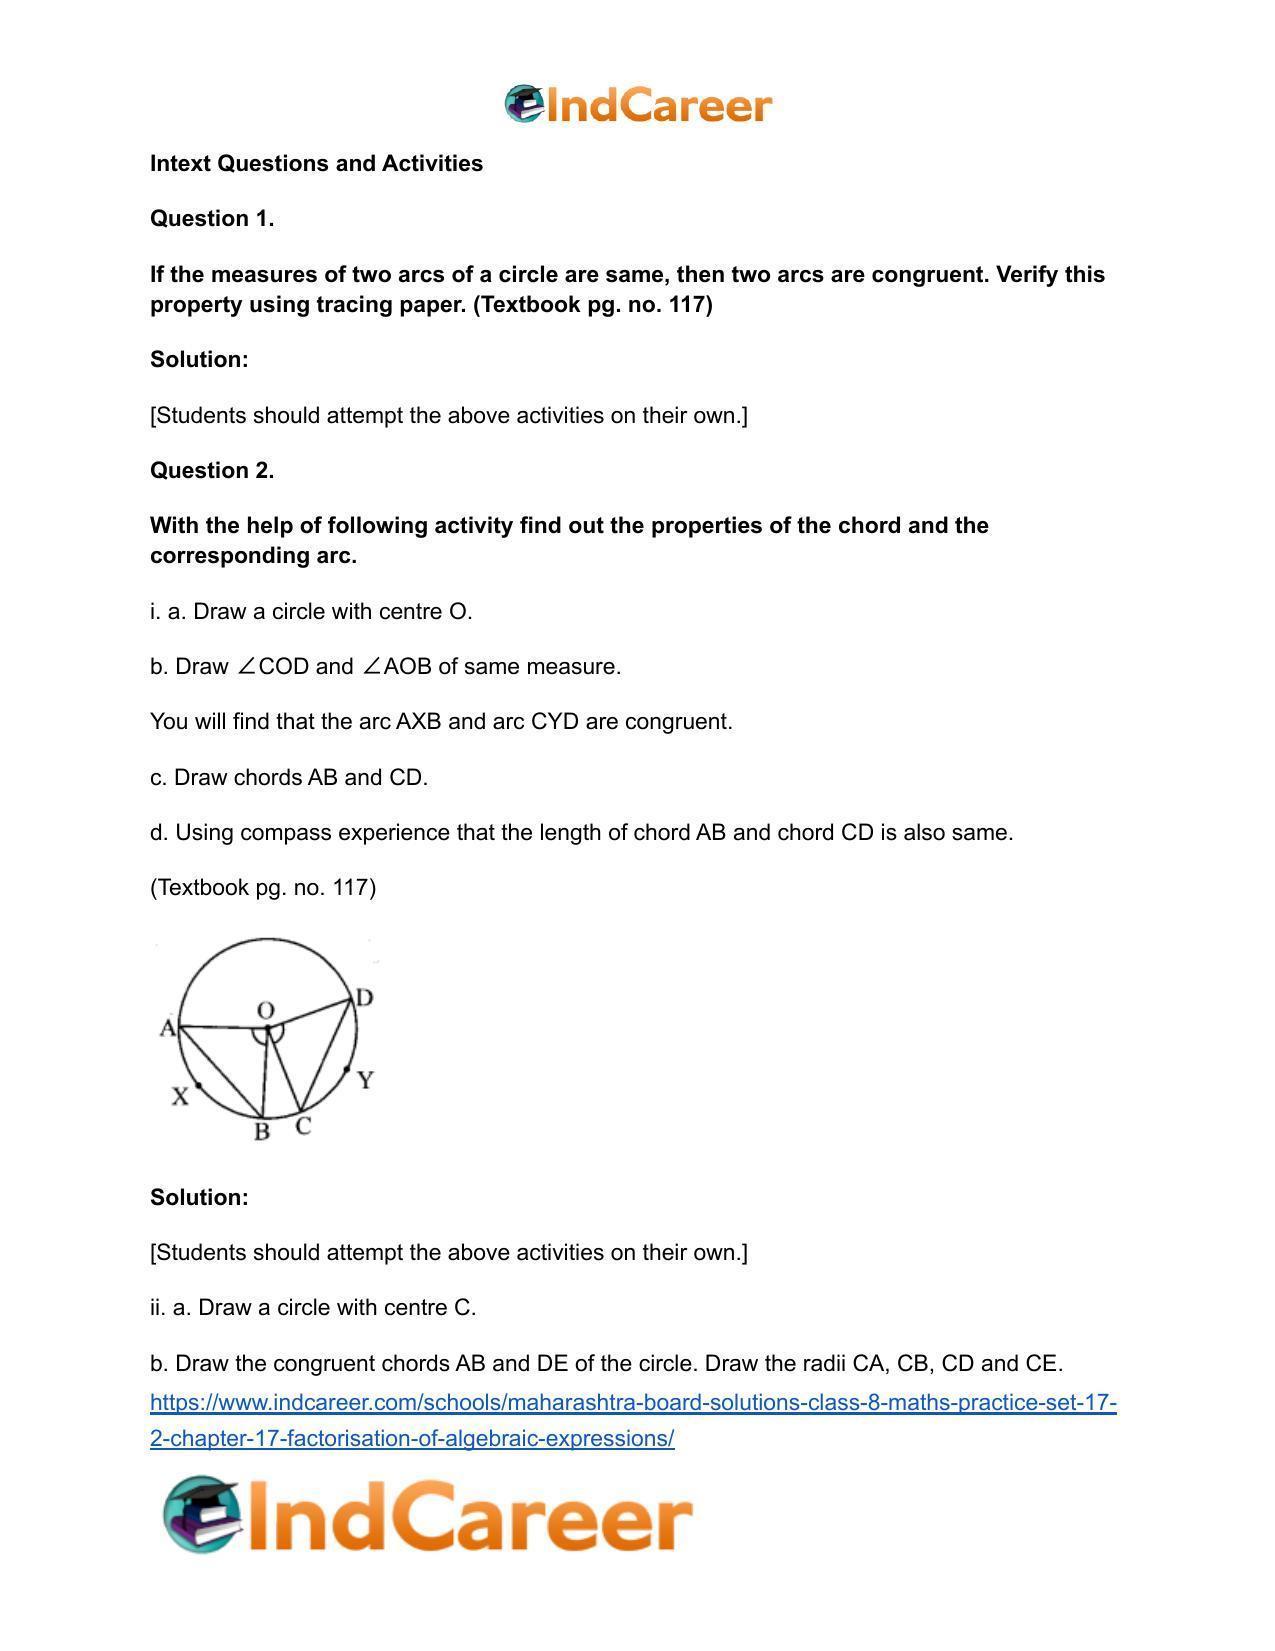 Maharashtra Board Solutions Class 8-Maths (Practice Set 17.2): Chapter 17- Factorisation of Algebraic Expressions - Page 5